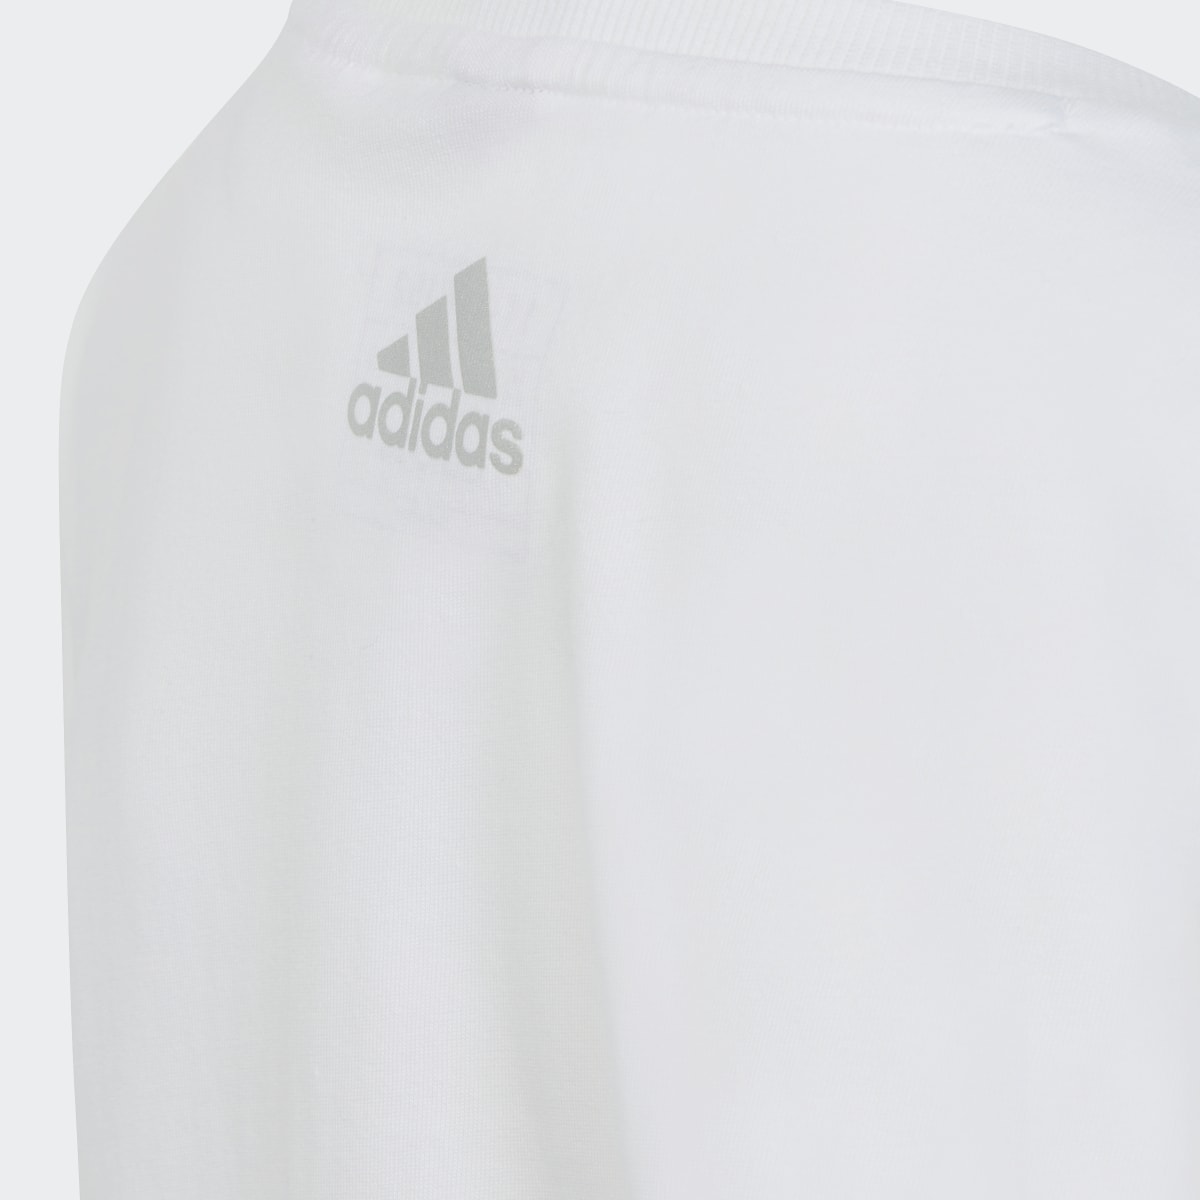 Adidas Dance Knotted Tee. 4